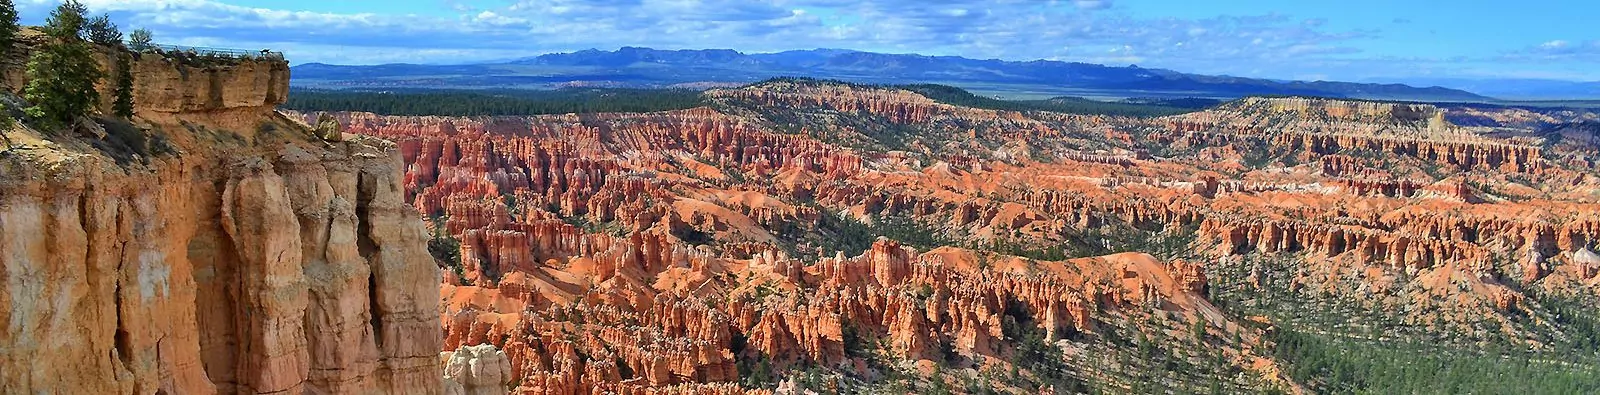 Views of Bryce Canyon National Park from the rim